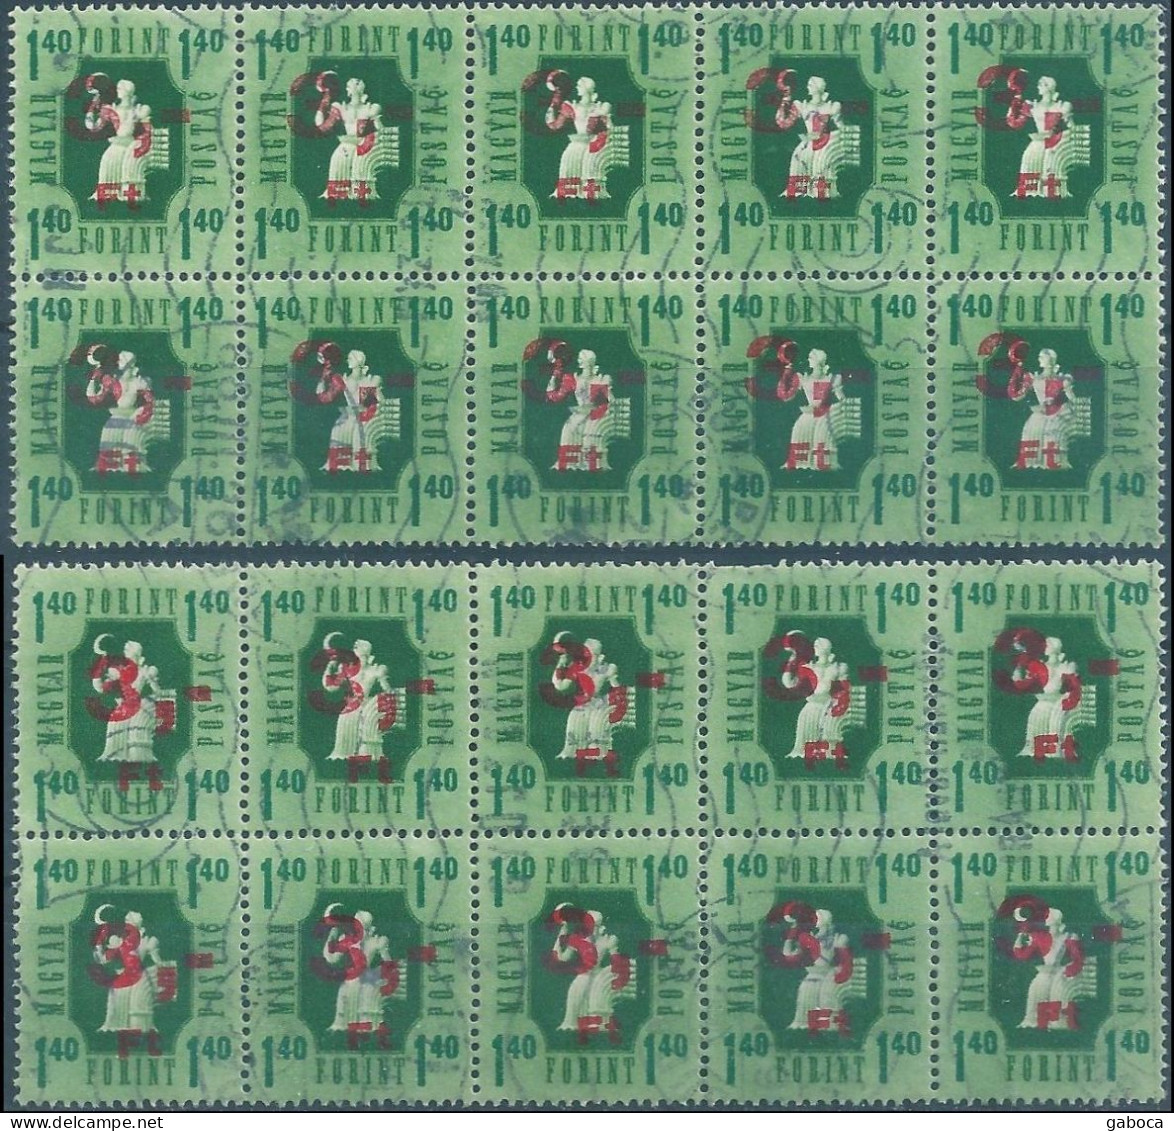 C5903 Hungary Parcel Stamp Agriculture Harvest Ovprnt Plate Block Of 10 Used 2xERROR - Post